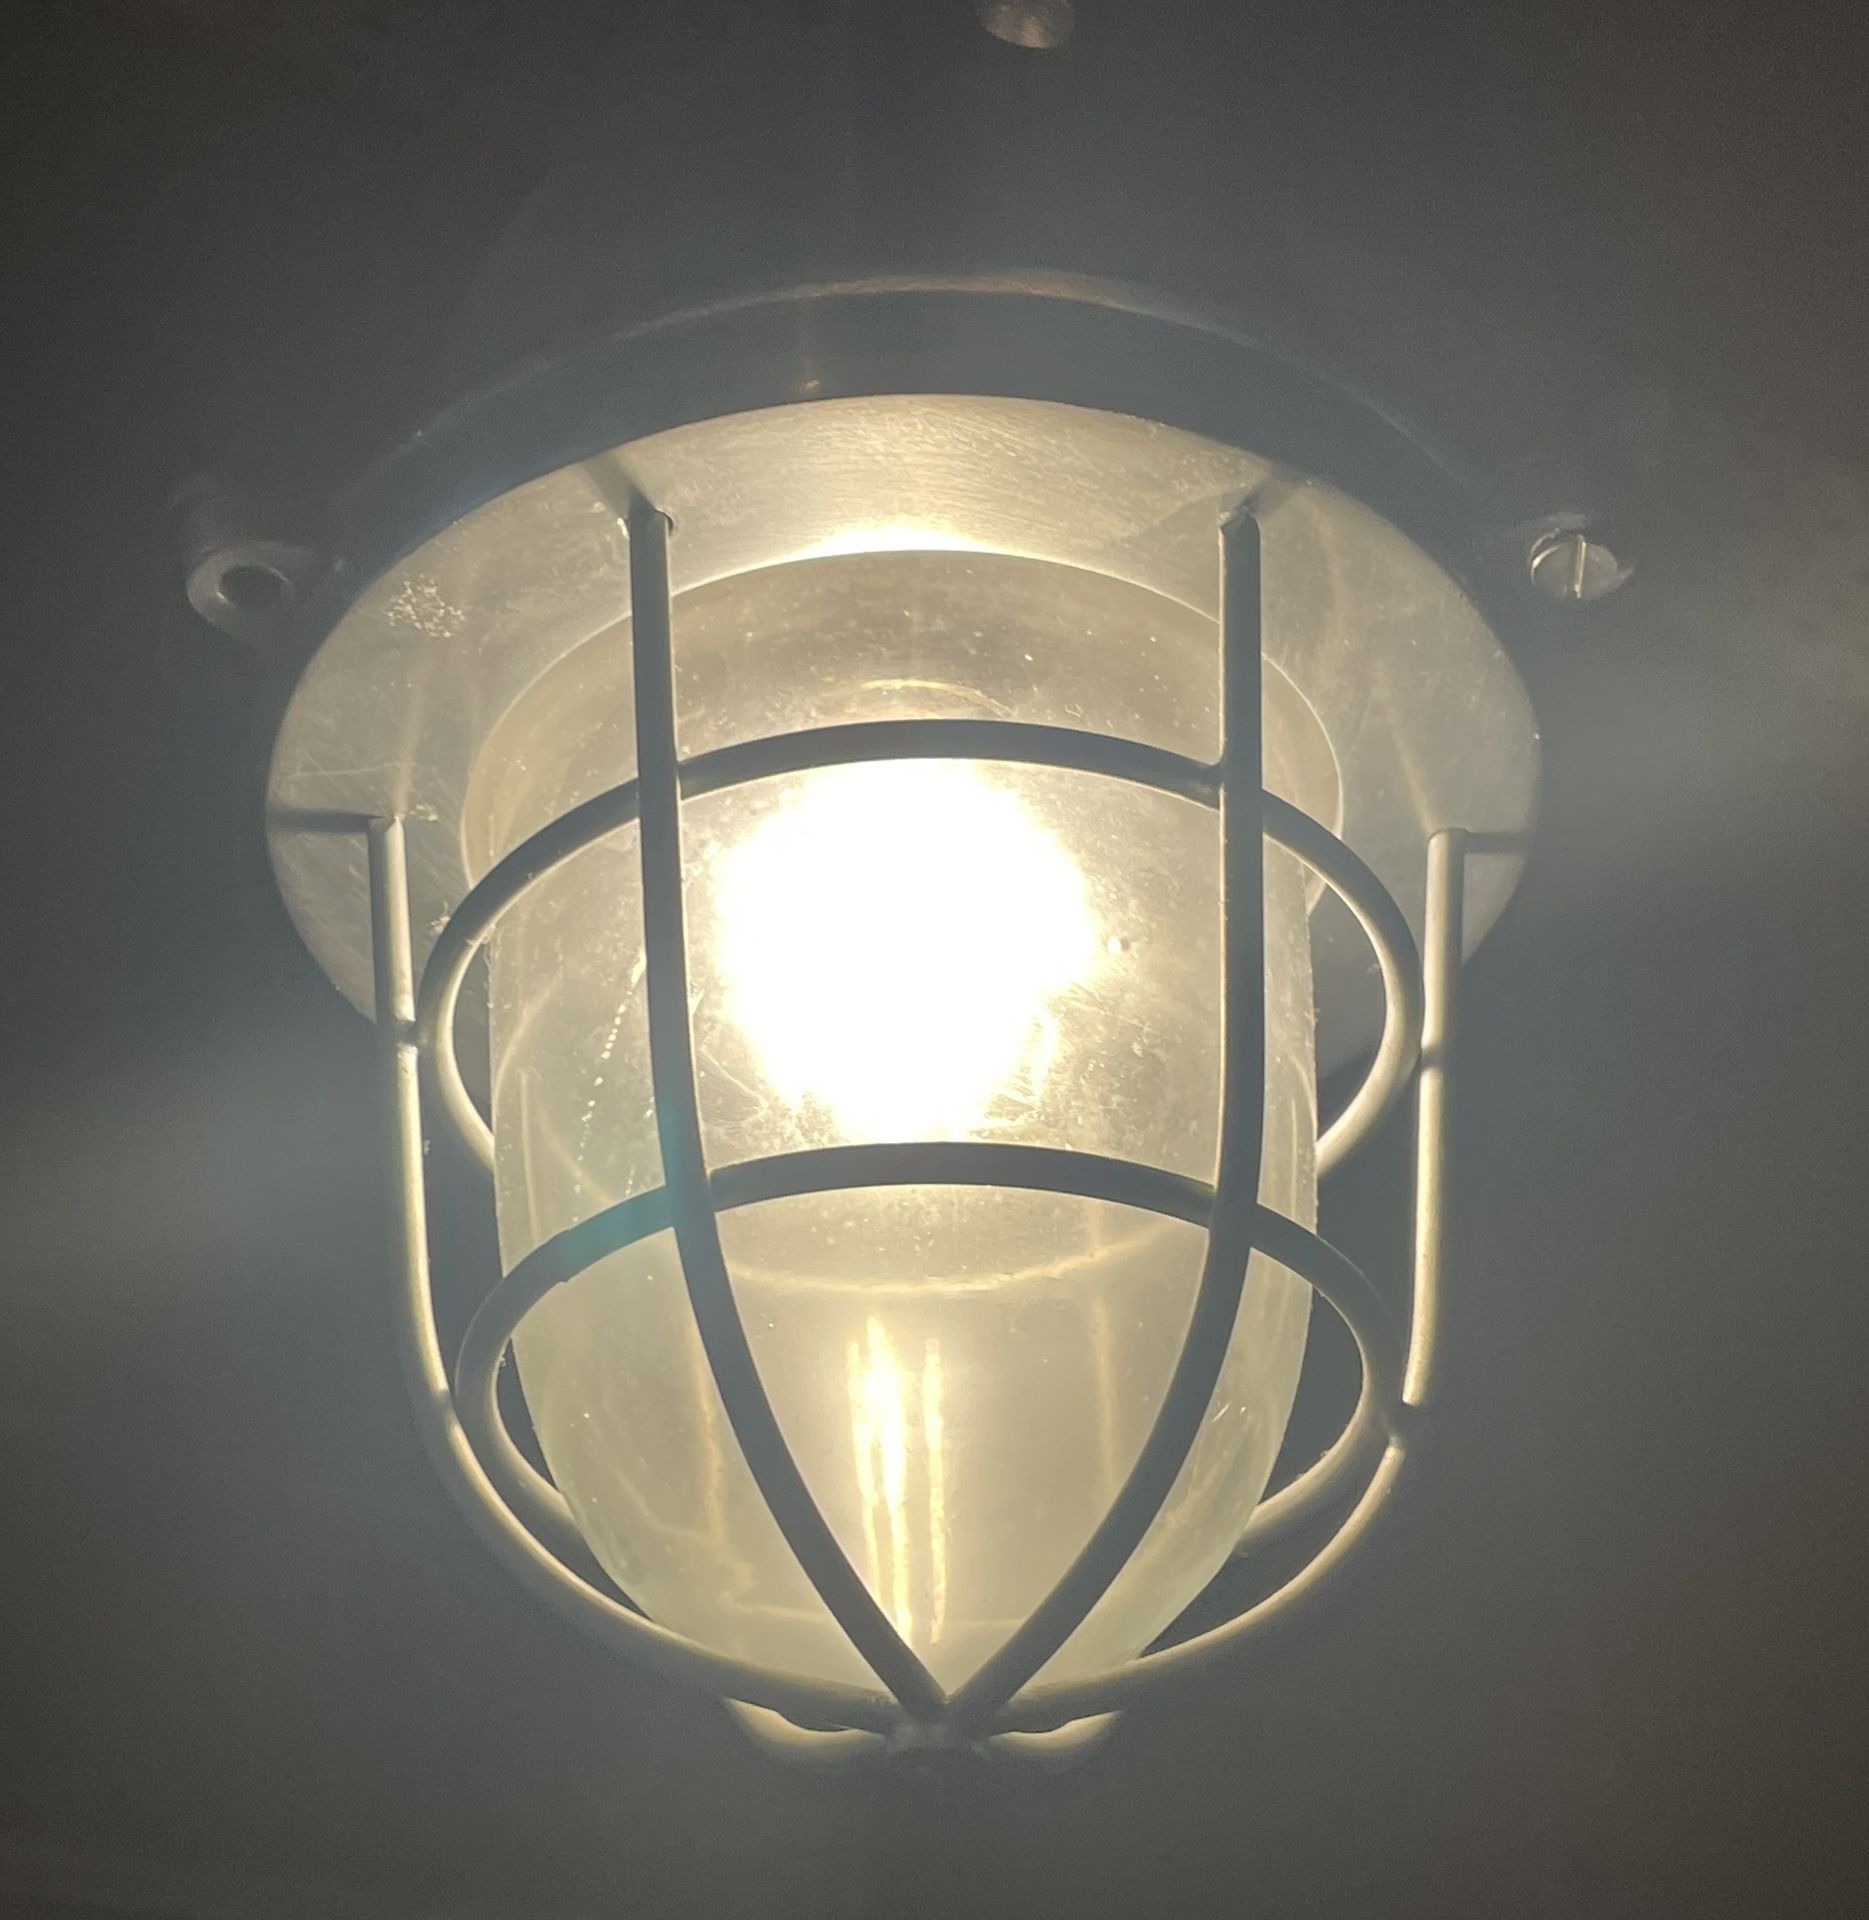 6 x Industrial Style Bulkhead Ceiling Light Pendants - Size: 30 x 120 cms - Suspended Size Unknown - Image 3 of 5